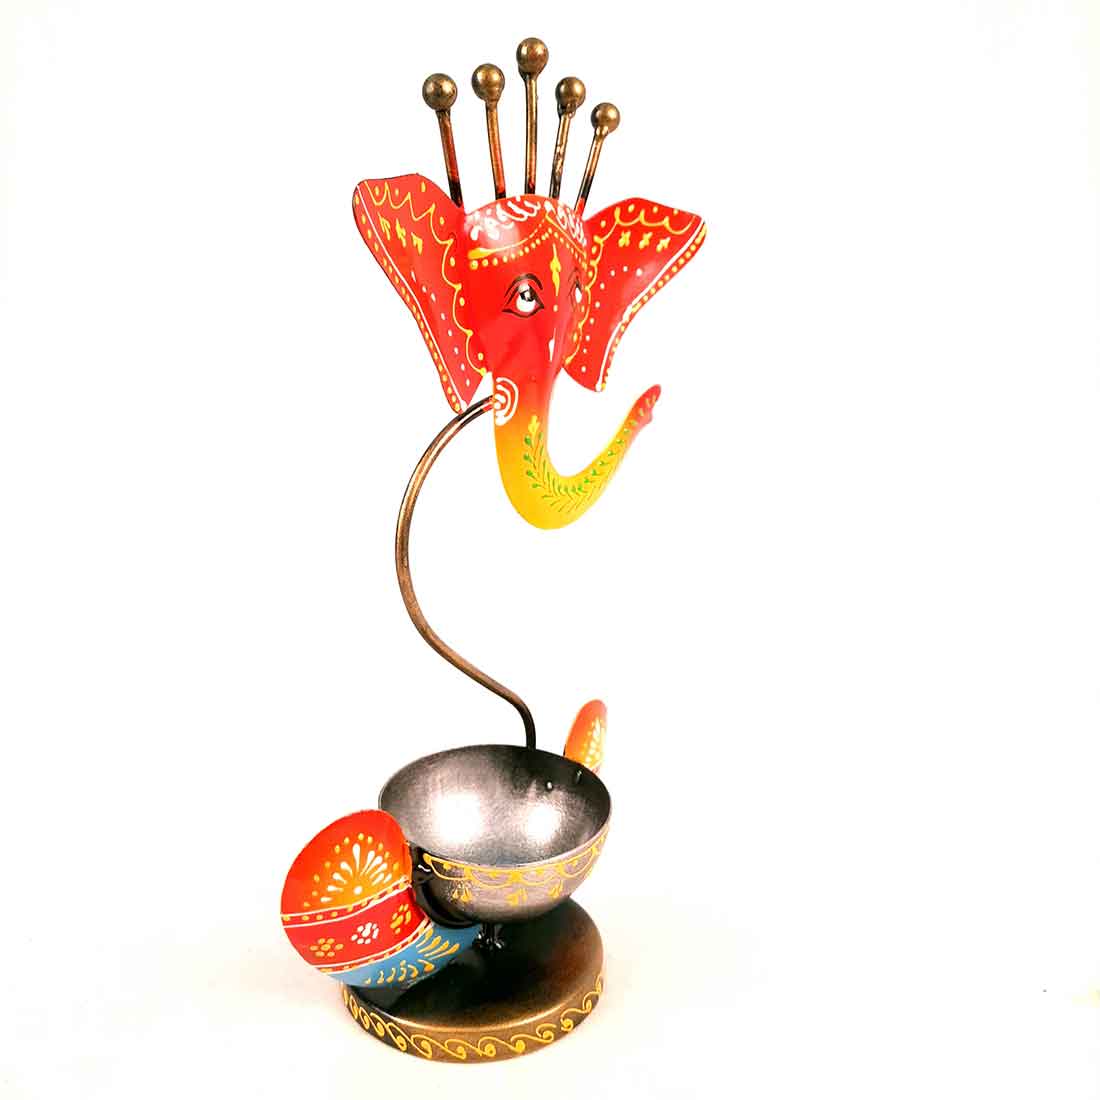 Candle Holder Stand | TeaLight Holder With One Slots Cum Showpiece  | Tea Light Candle Stands - Ganesha Design - For Home, Table, Living Room, Dining room, Bedroom Decor | For Diwali Decoration & Gifts - 12 Inch